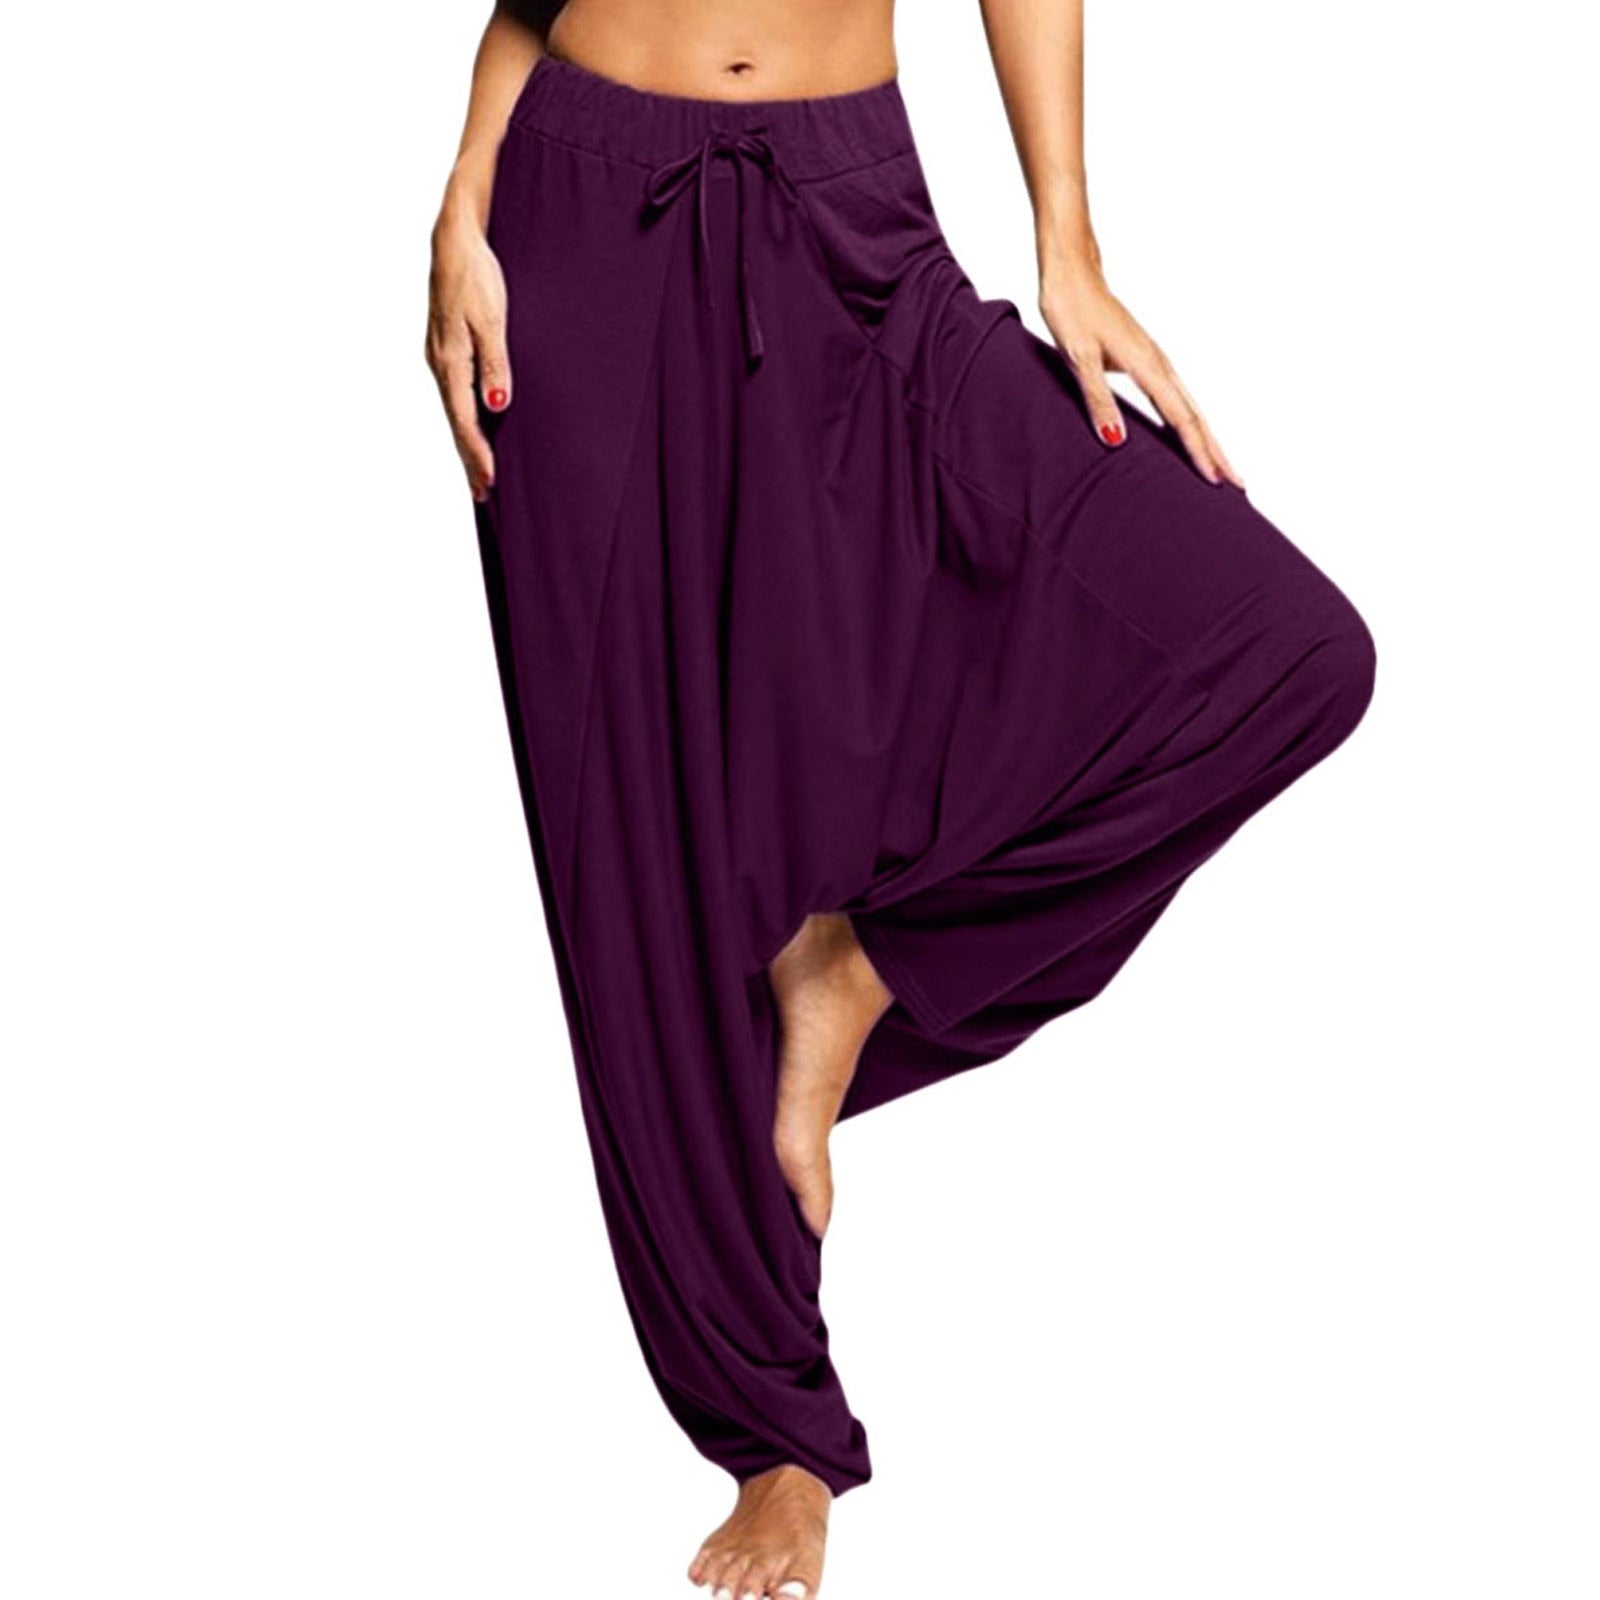 Yoga Harem Pants Women Fashion Solid Color Yoga Pants Casual High Waist Drawstring Comfortable Summer Loose Sport Pants Jumpsuit - Personal Hour for Yoga and Meditations 